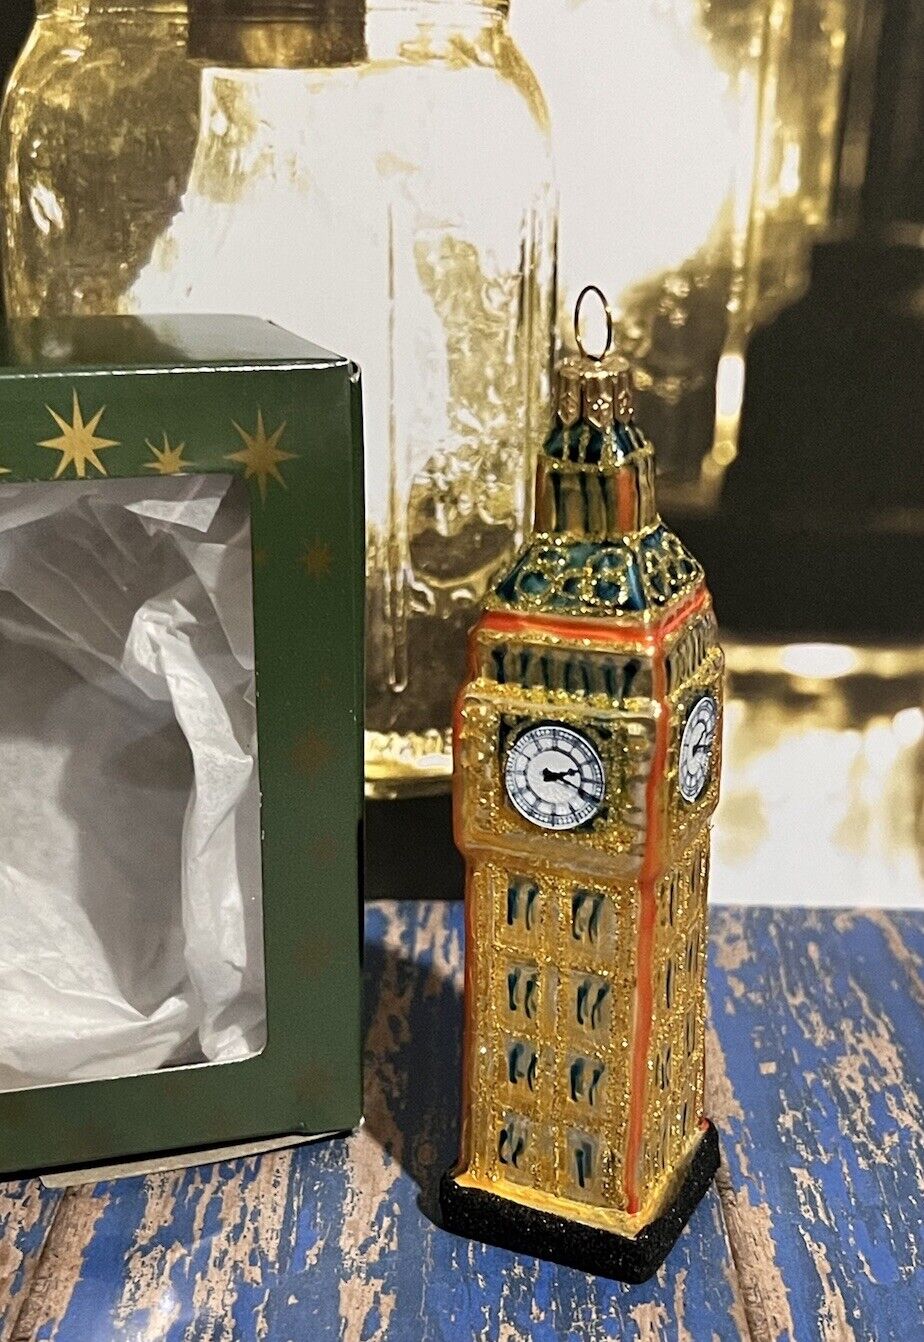 IMPULS Traditional Mouth Blown Glass Ornament Big Ben London England NEW Poland